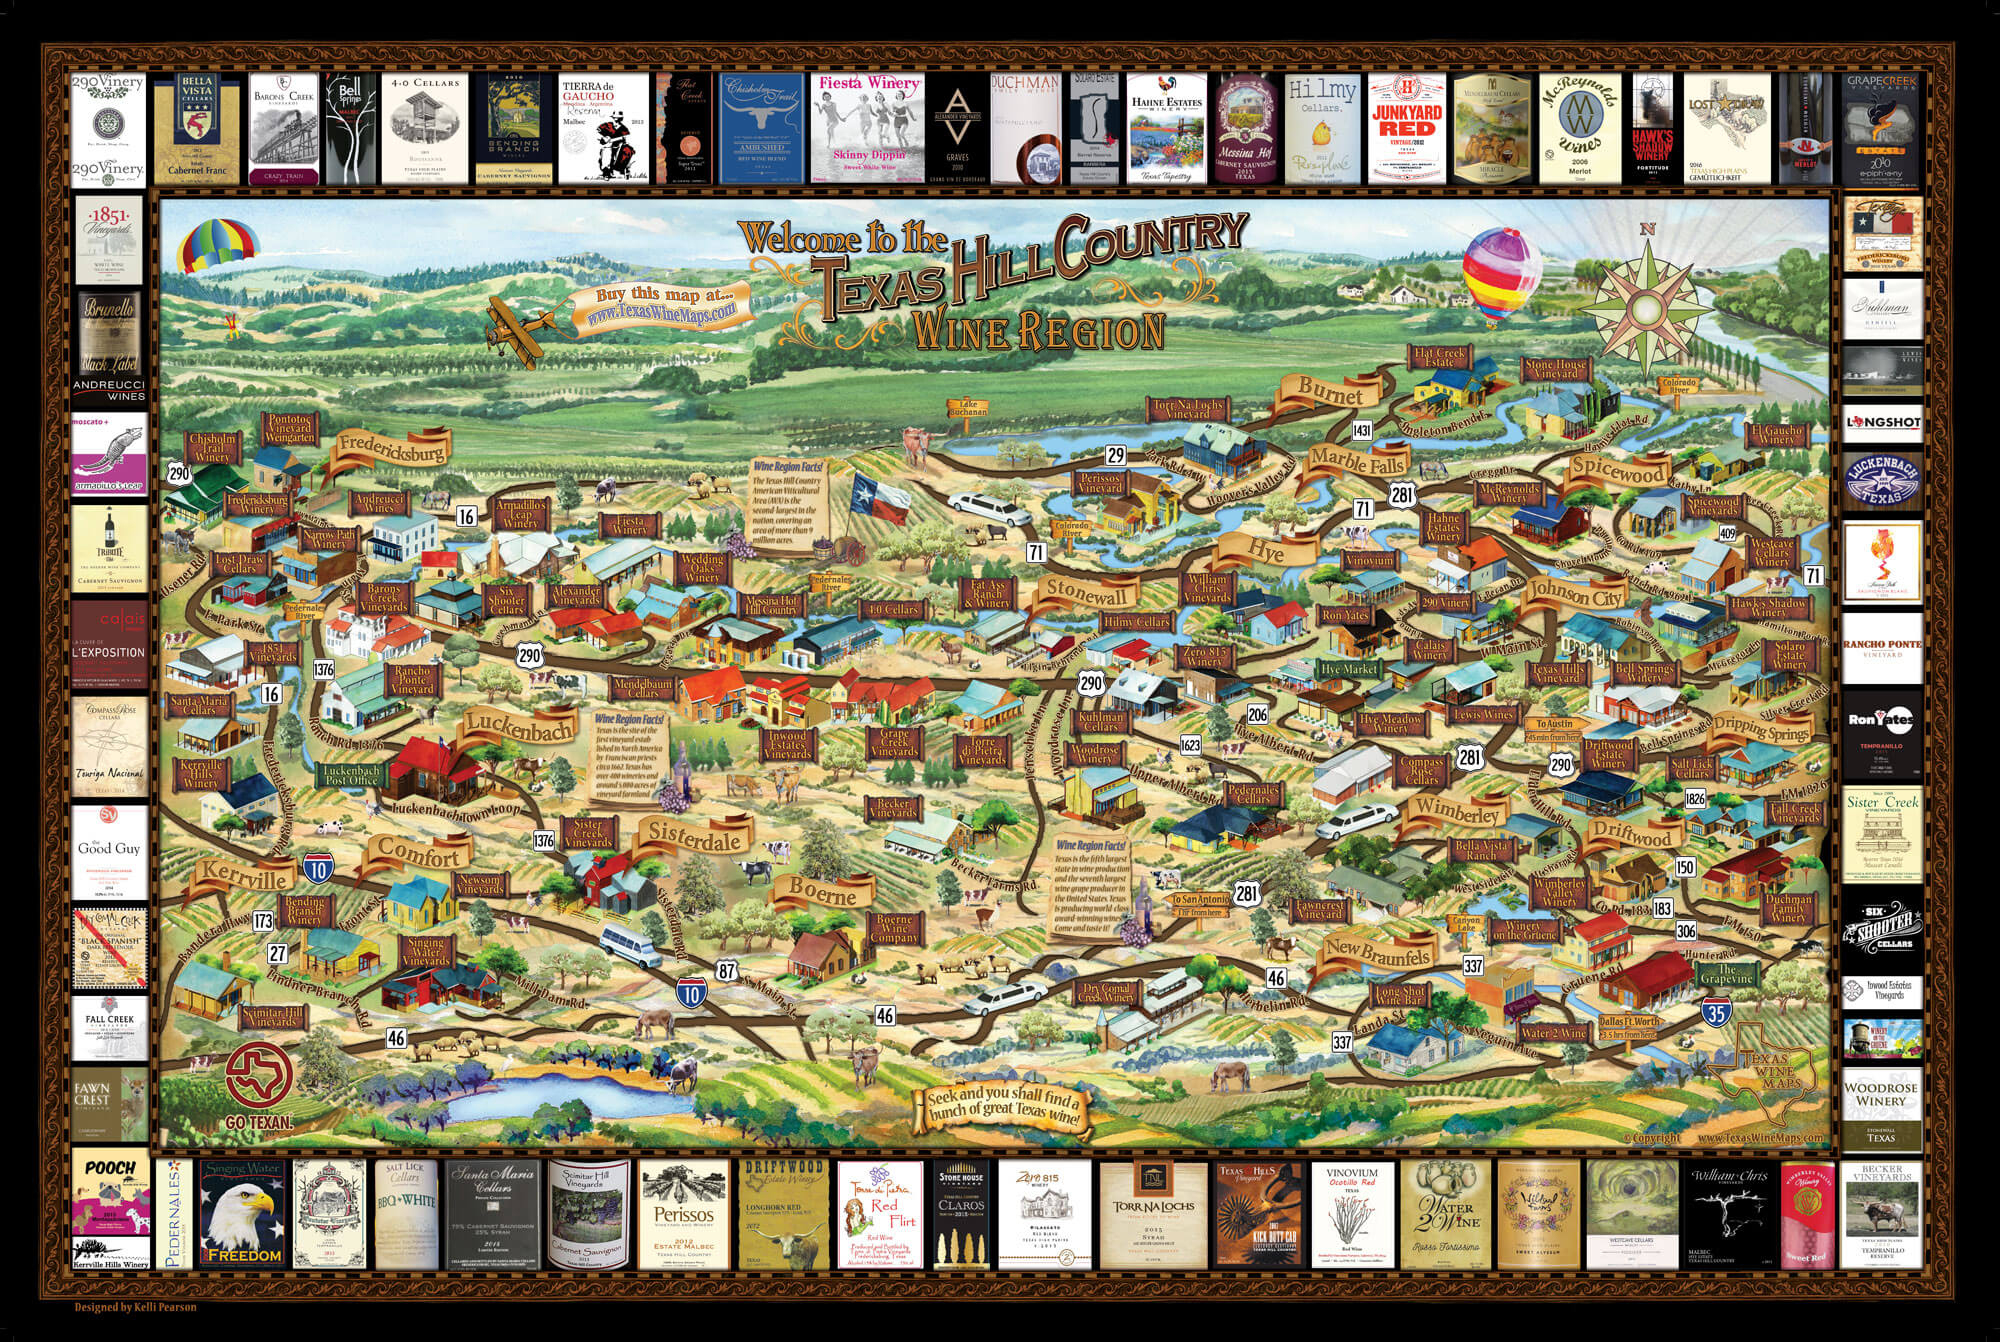 Laminated Texas Wine Map | Texas Wineries Map |Texas Hill Country - Fredericksburg Texas Winery Map